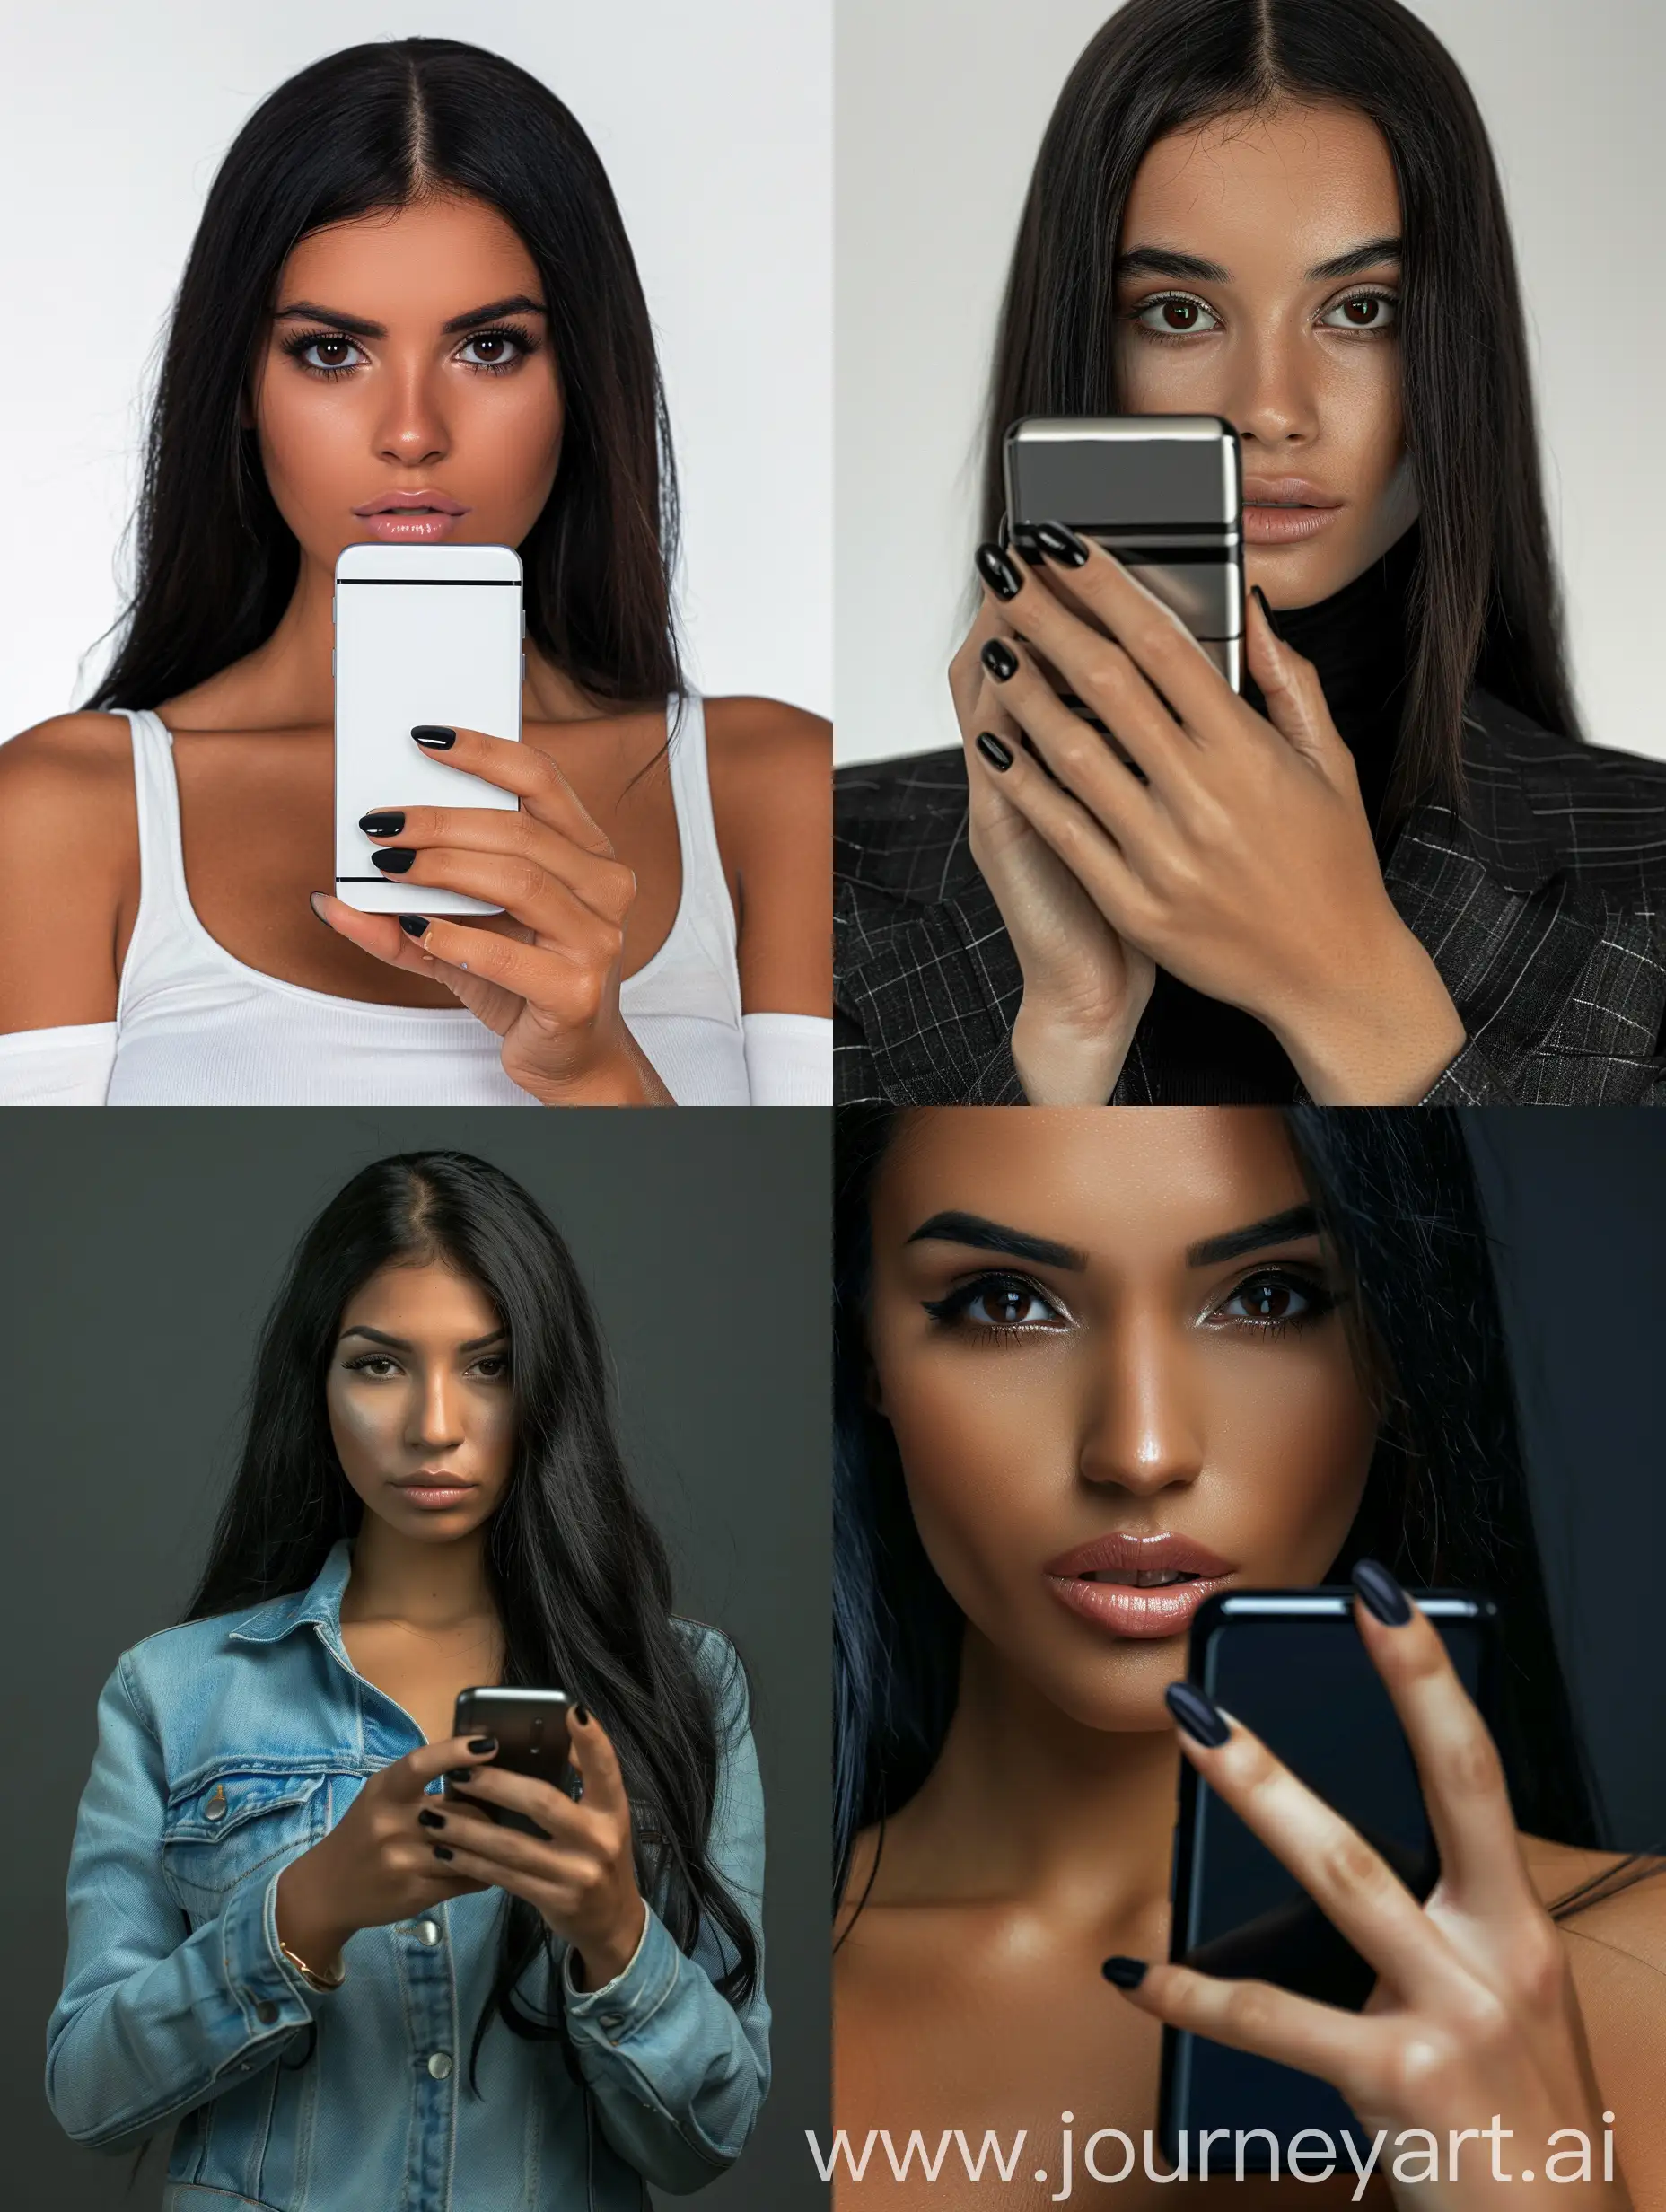 An attractive young Latina woman holding a cell phone. Her fingernails are painted black, and her facial expression is robotic and empty. 